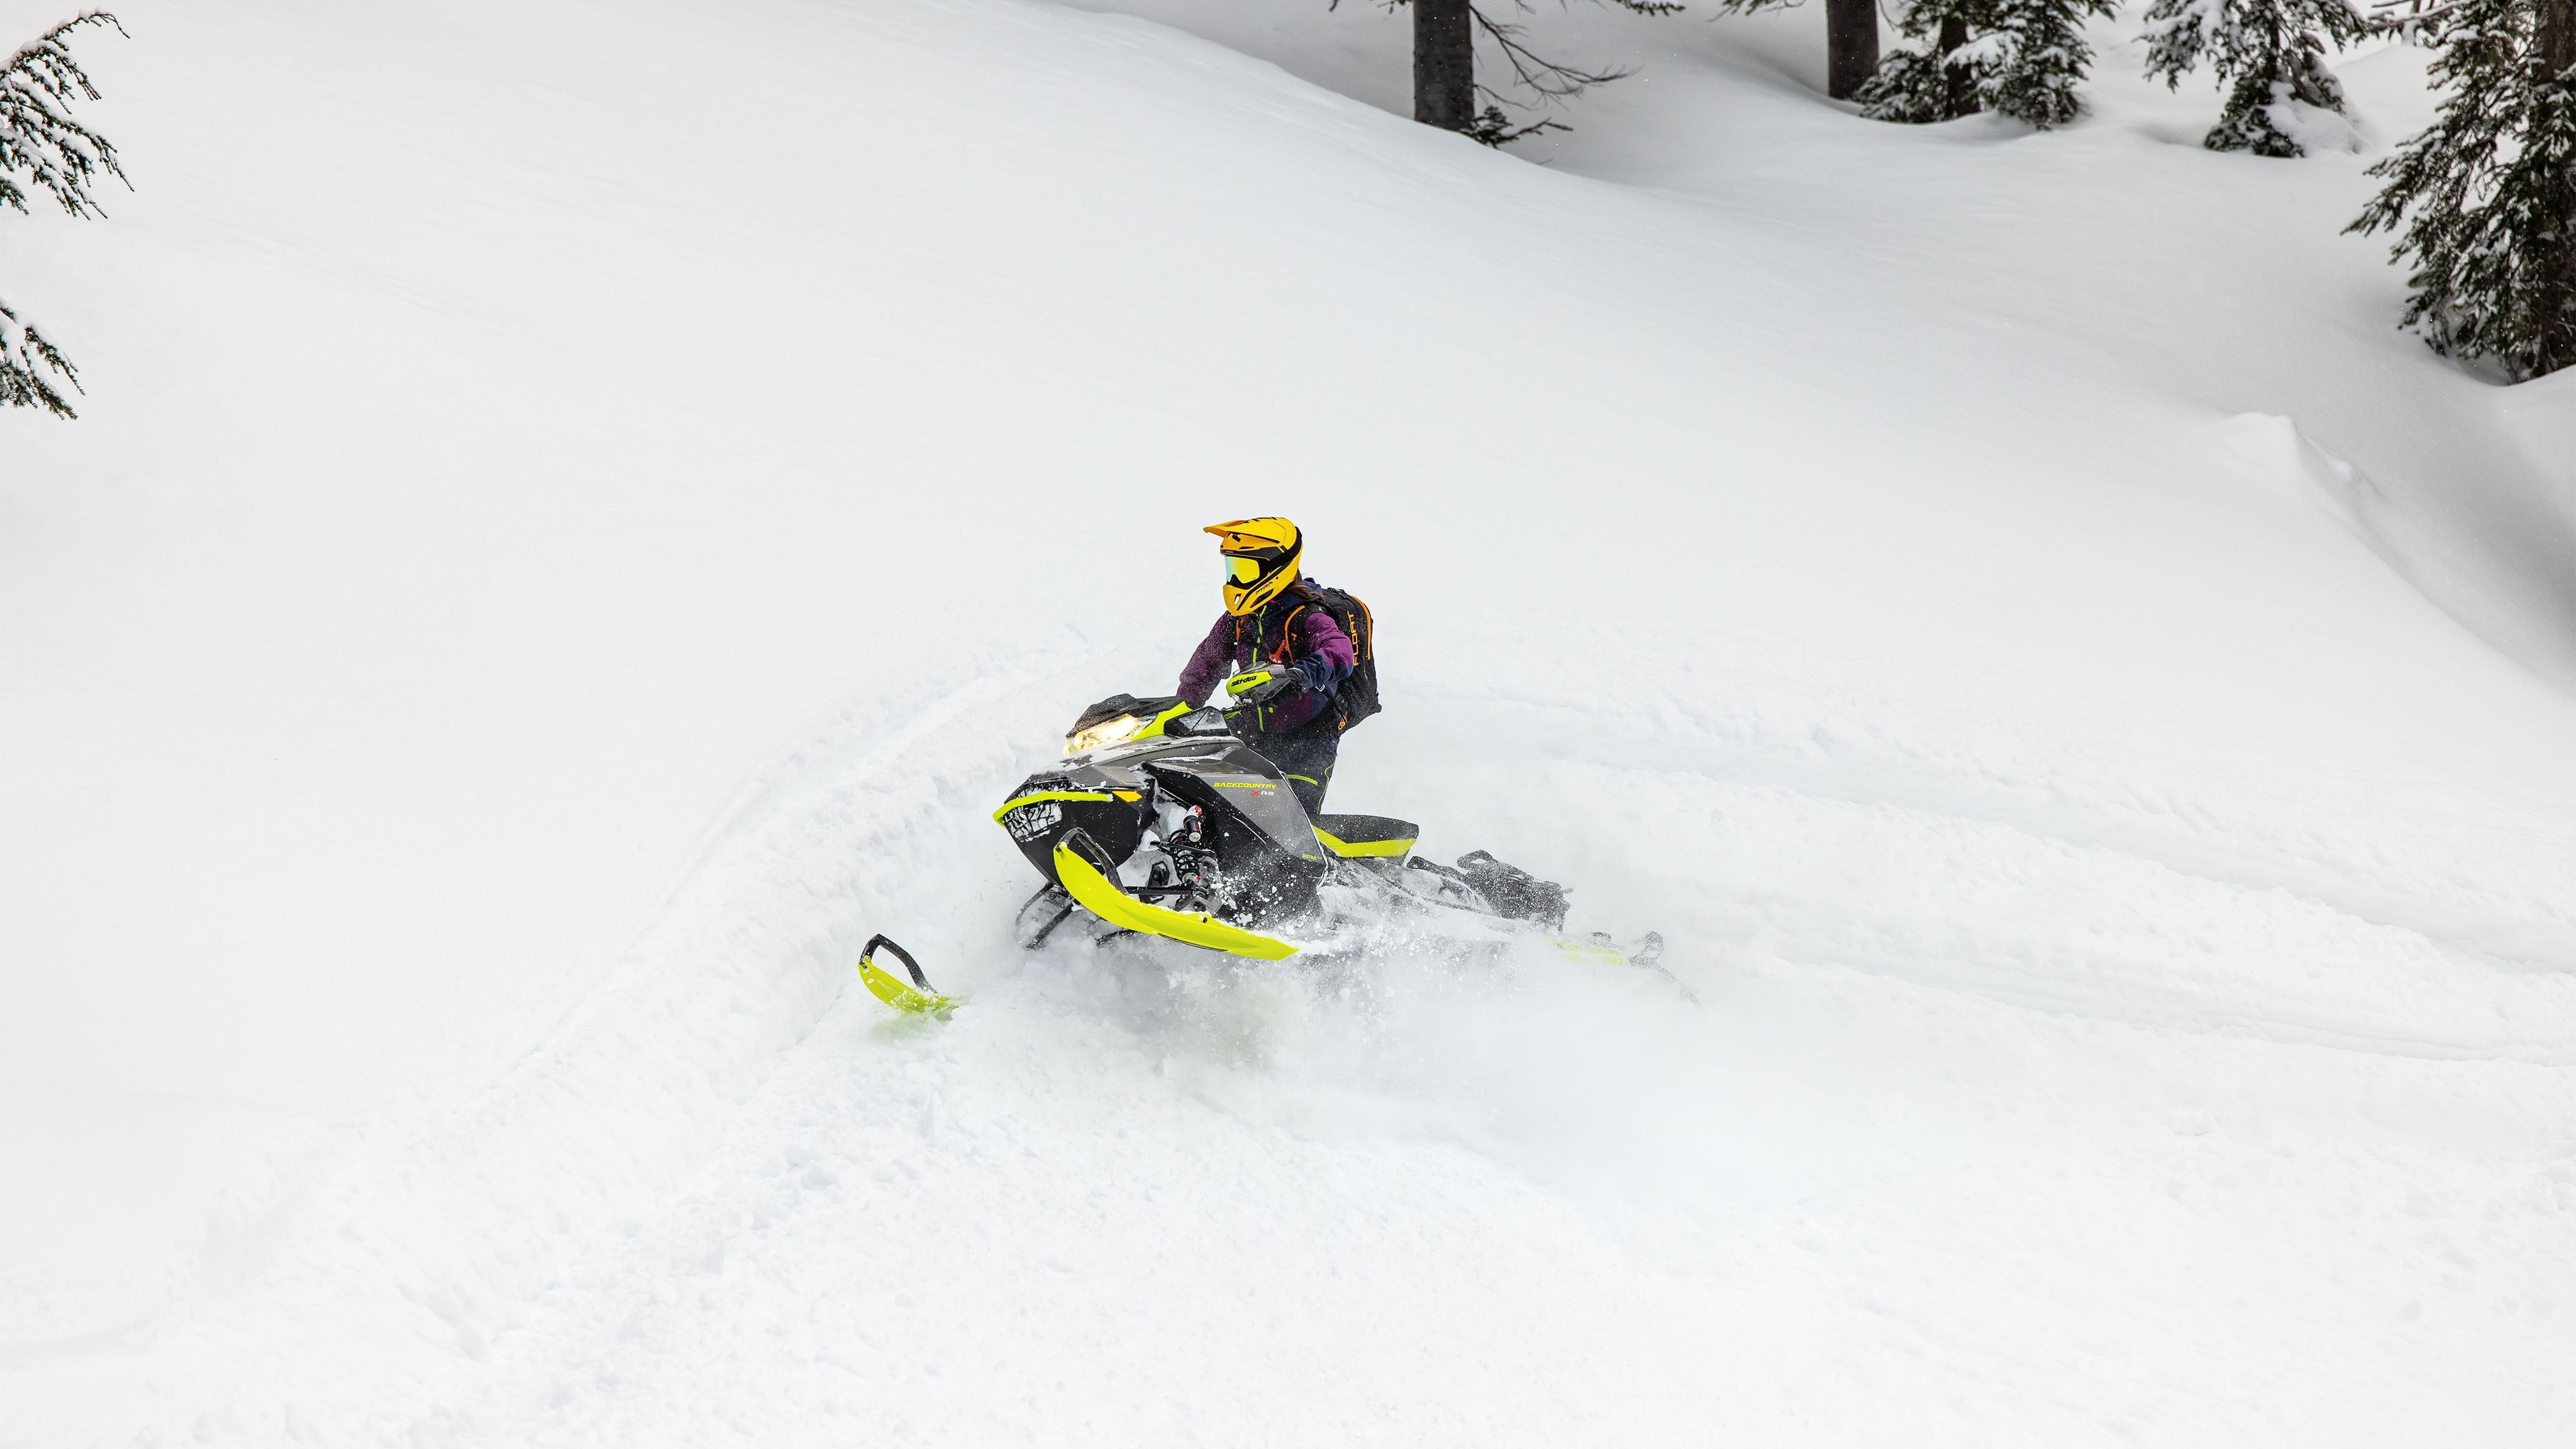 Man riding in Deep-Snow with a Ski-Doo Crossover Snowmobile